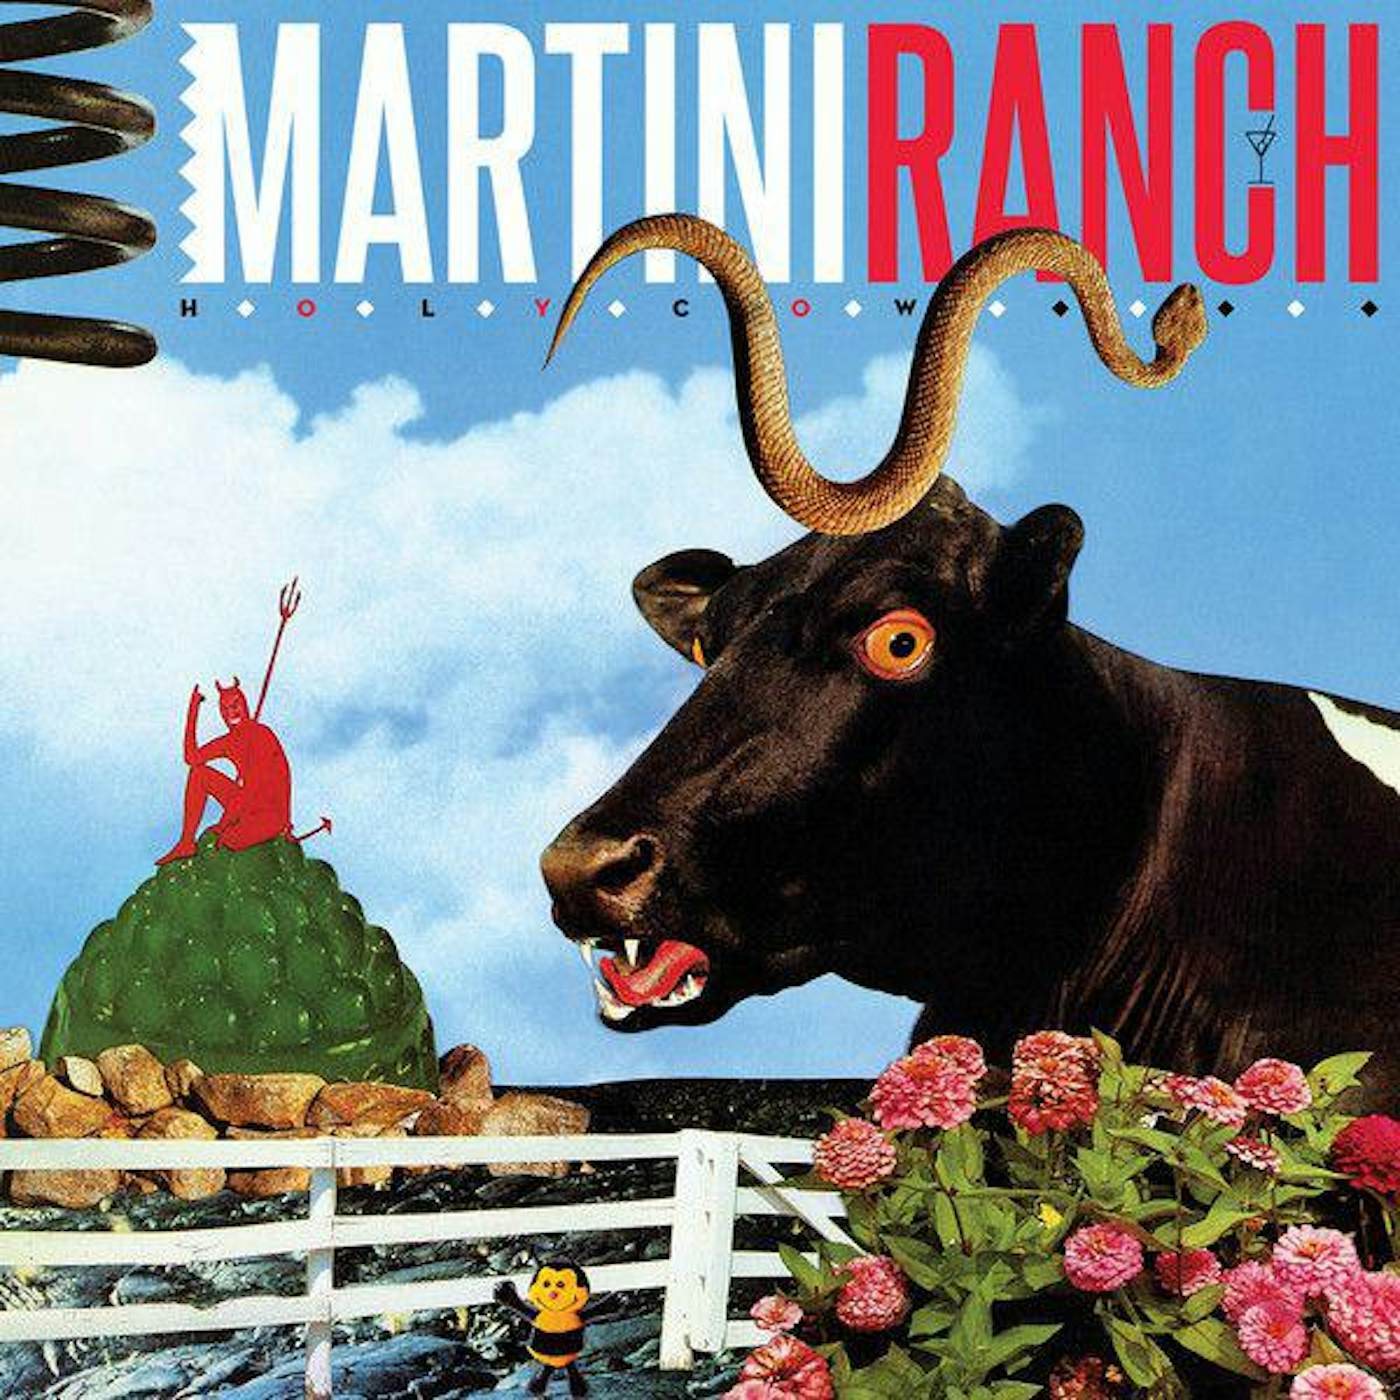 Martini Ranch Holy Cow (180G/Colored/DL Card/Gatefold) Vinyl Record